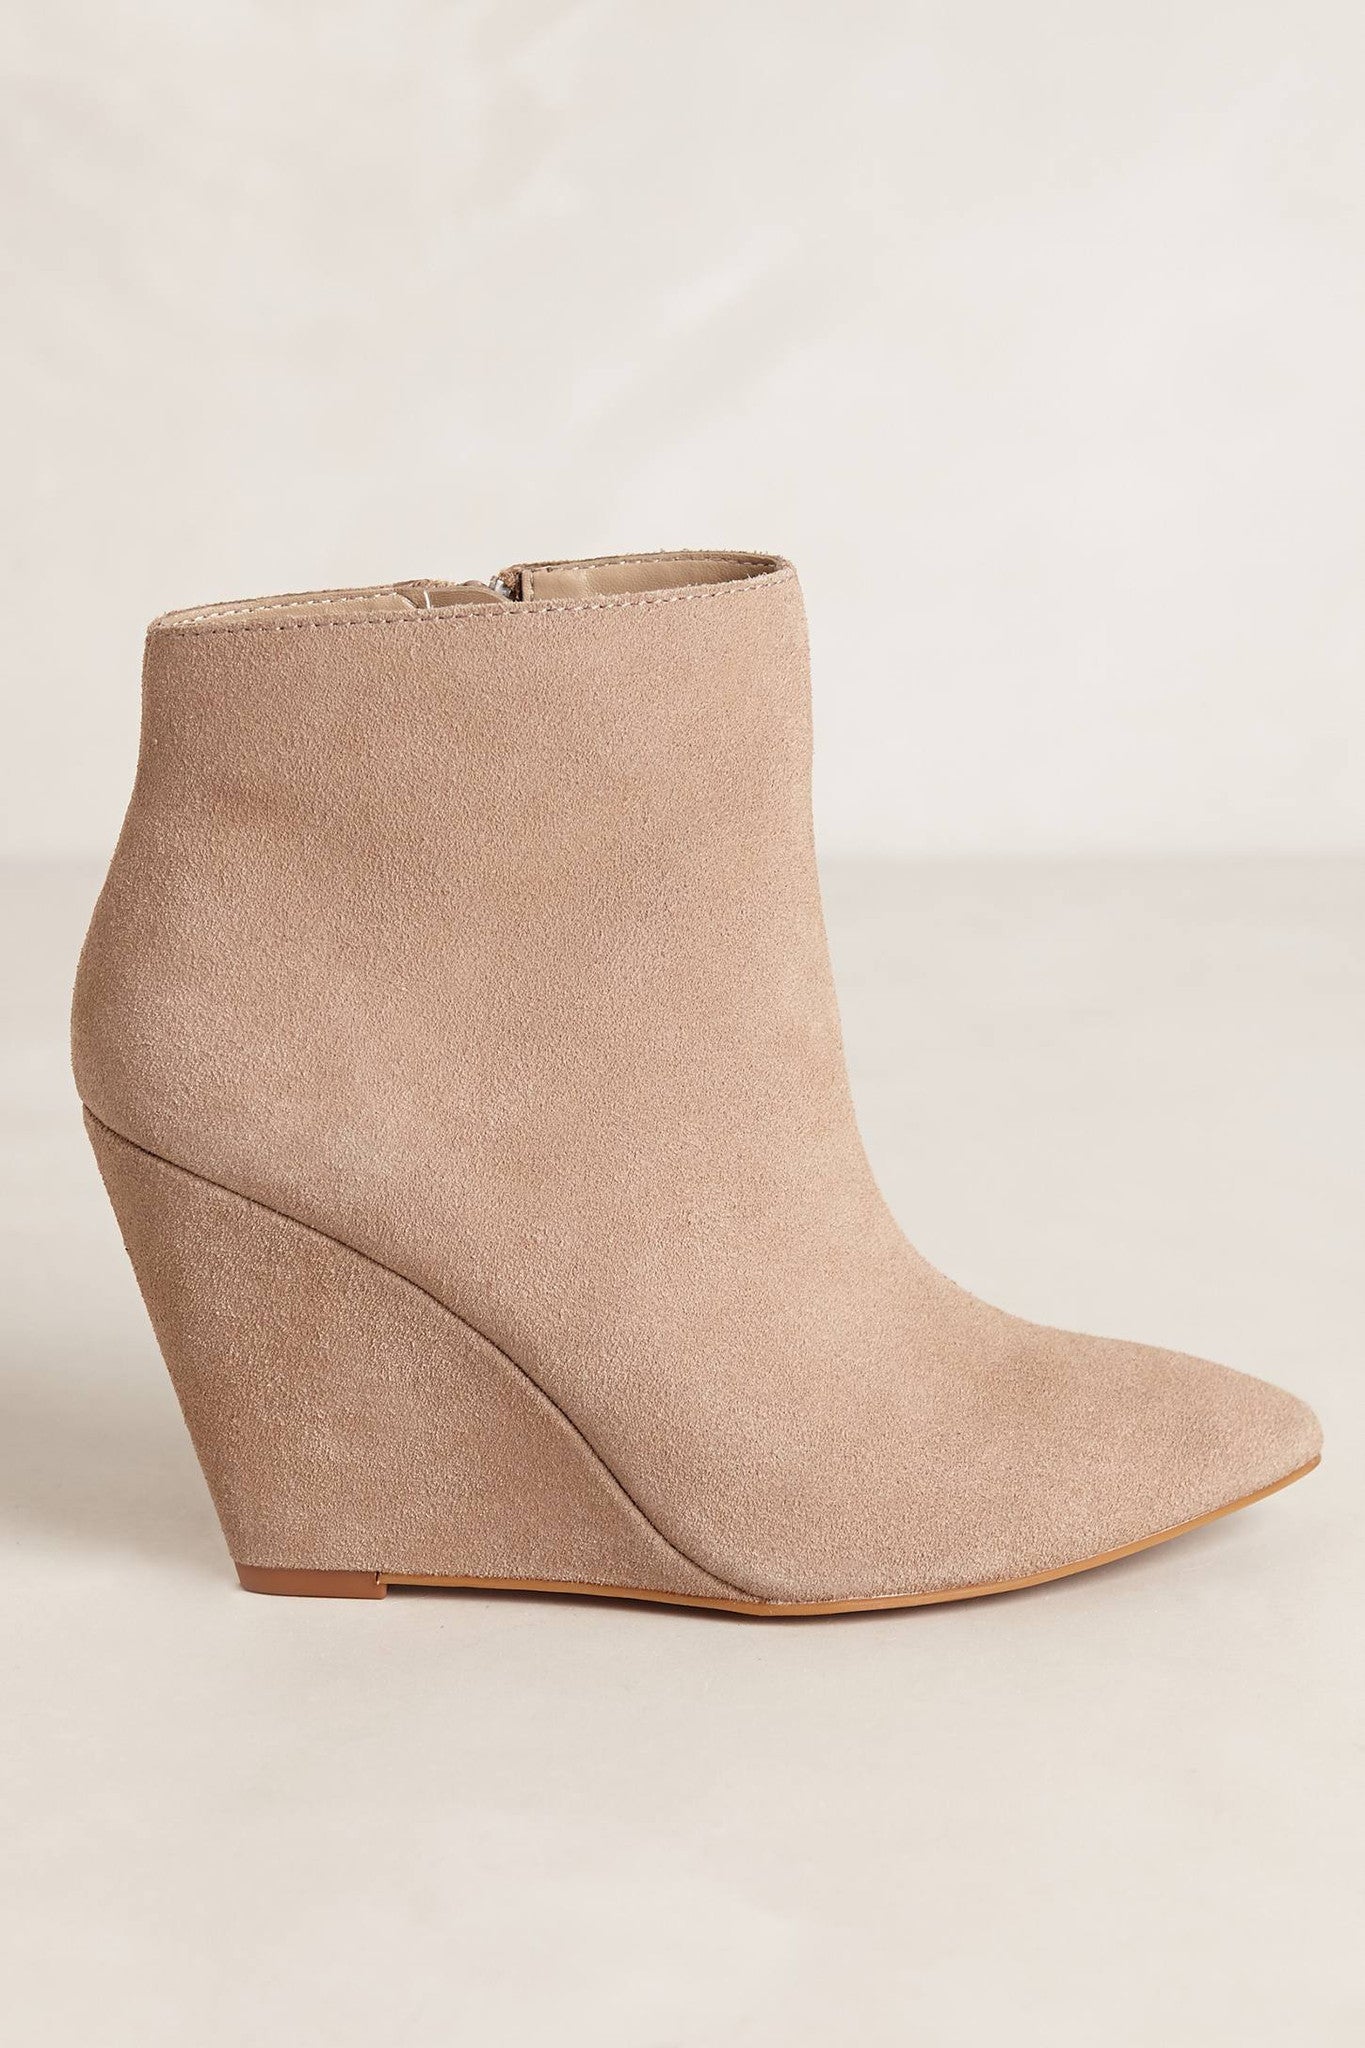 Cary Wedge Booties